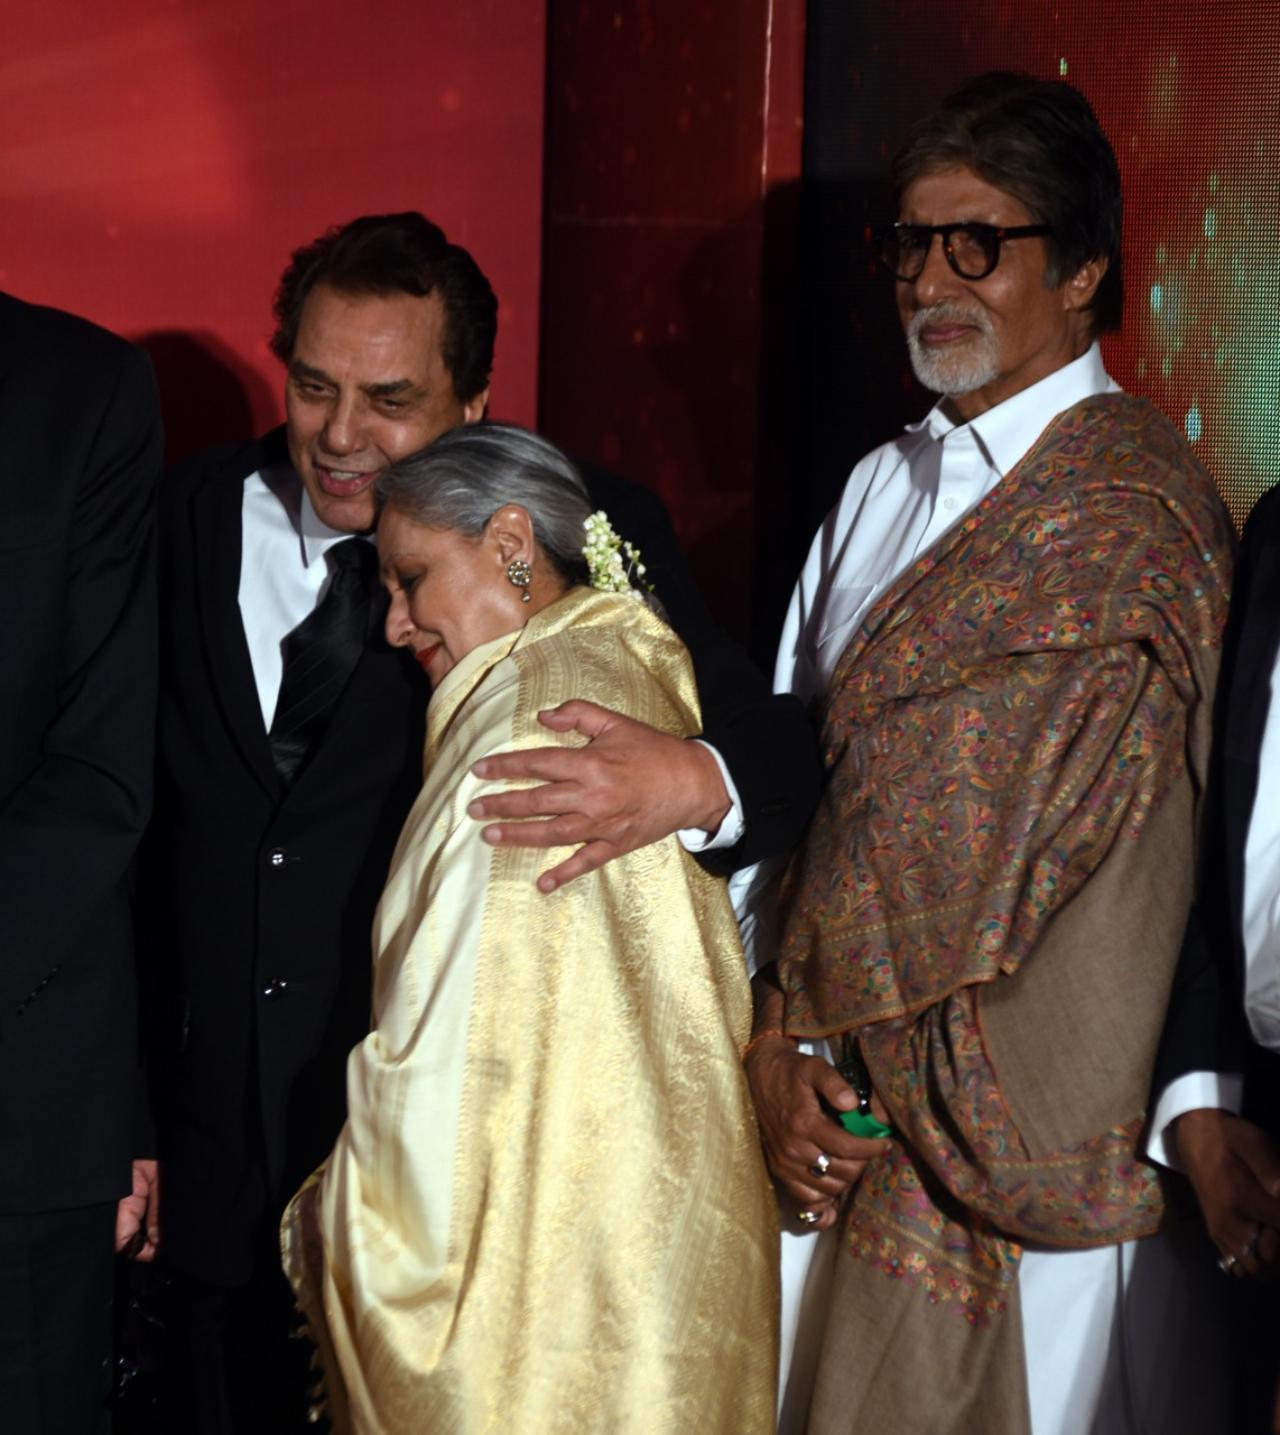 The Sholay trio have a warm reunion at an event. Jaya Bachchan gives a hug to her co-star as Amitabh Bachchan looks on